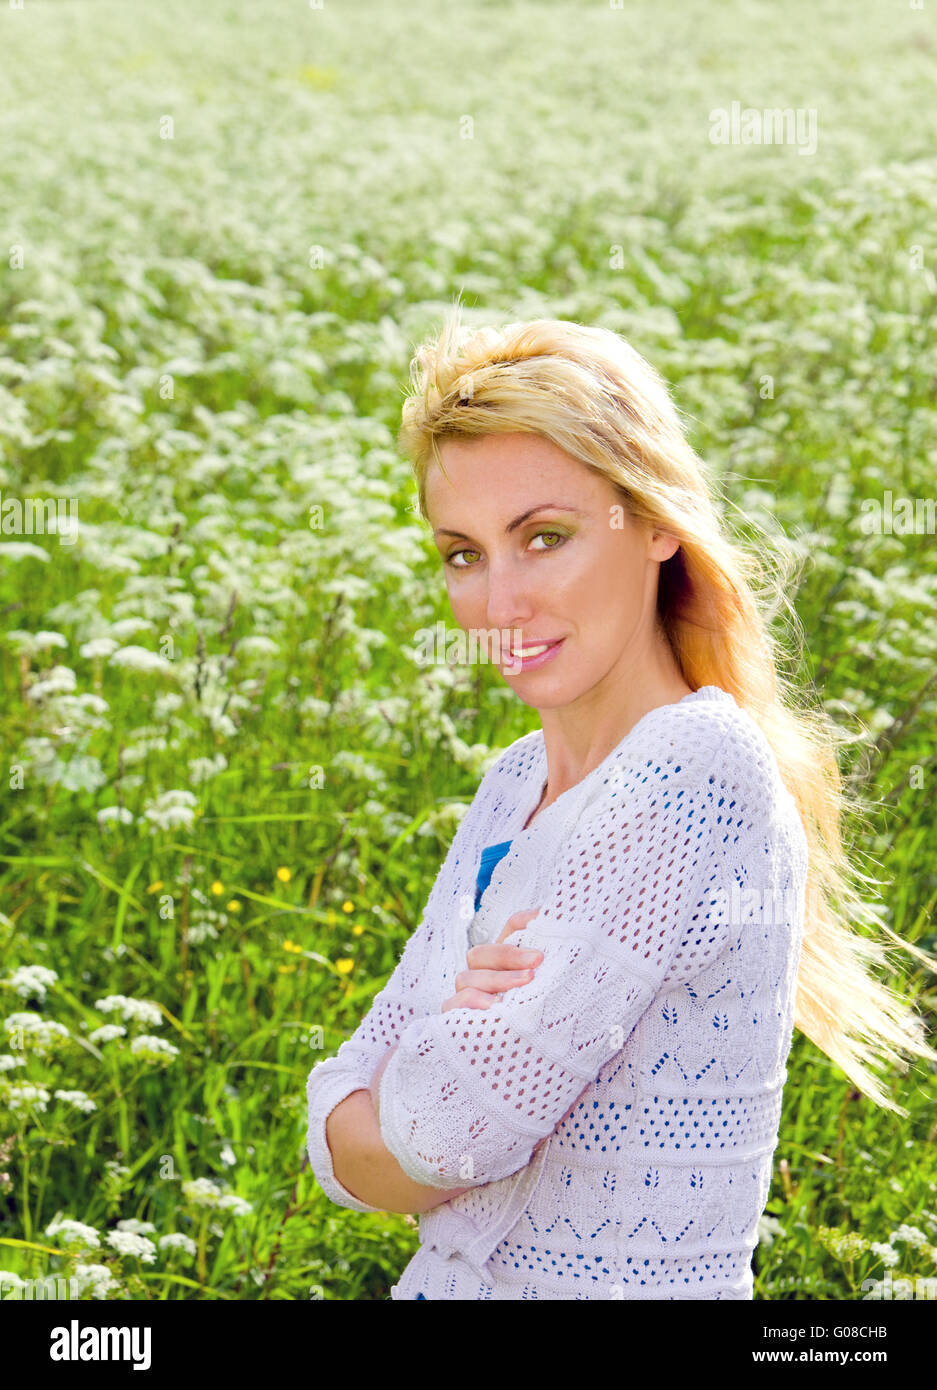 Female portrait against a meadow with white colors Stock Photo